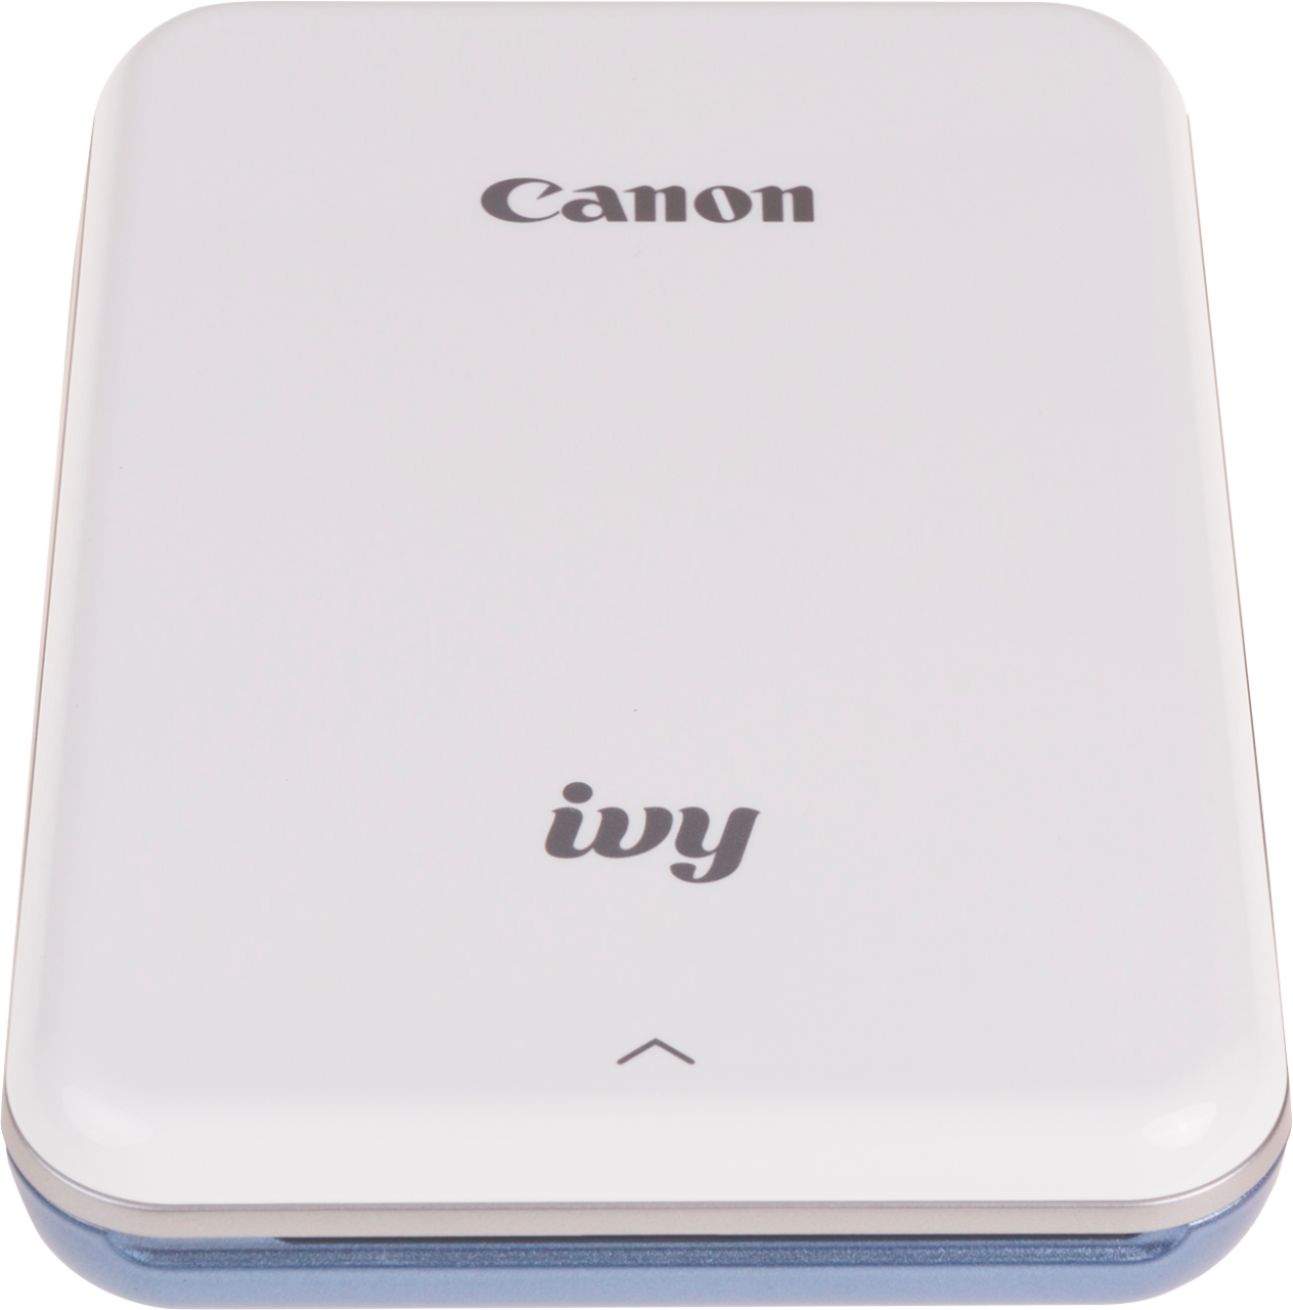 Canon IVY Printer Paper: The Ultimate Guide for High-Quality Photo Printing